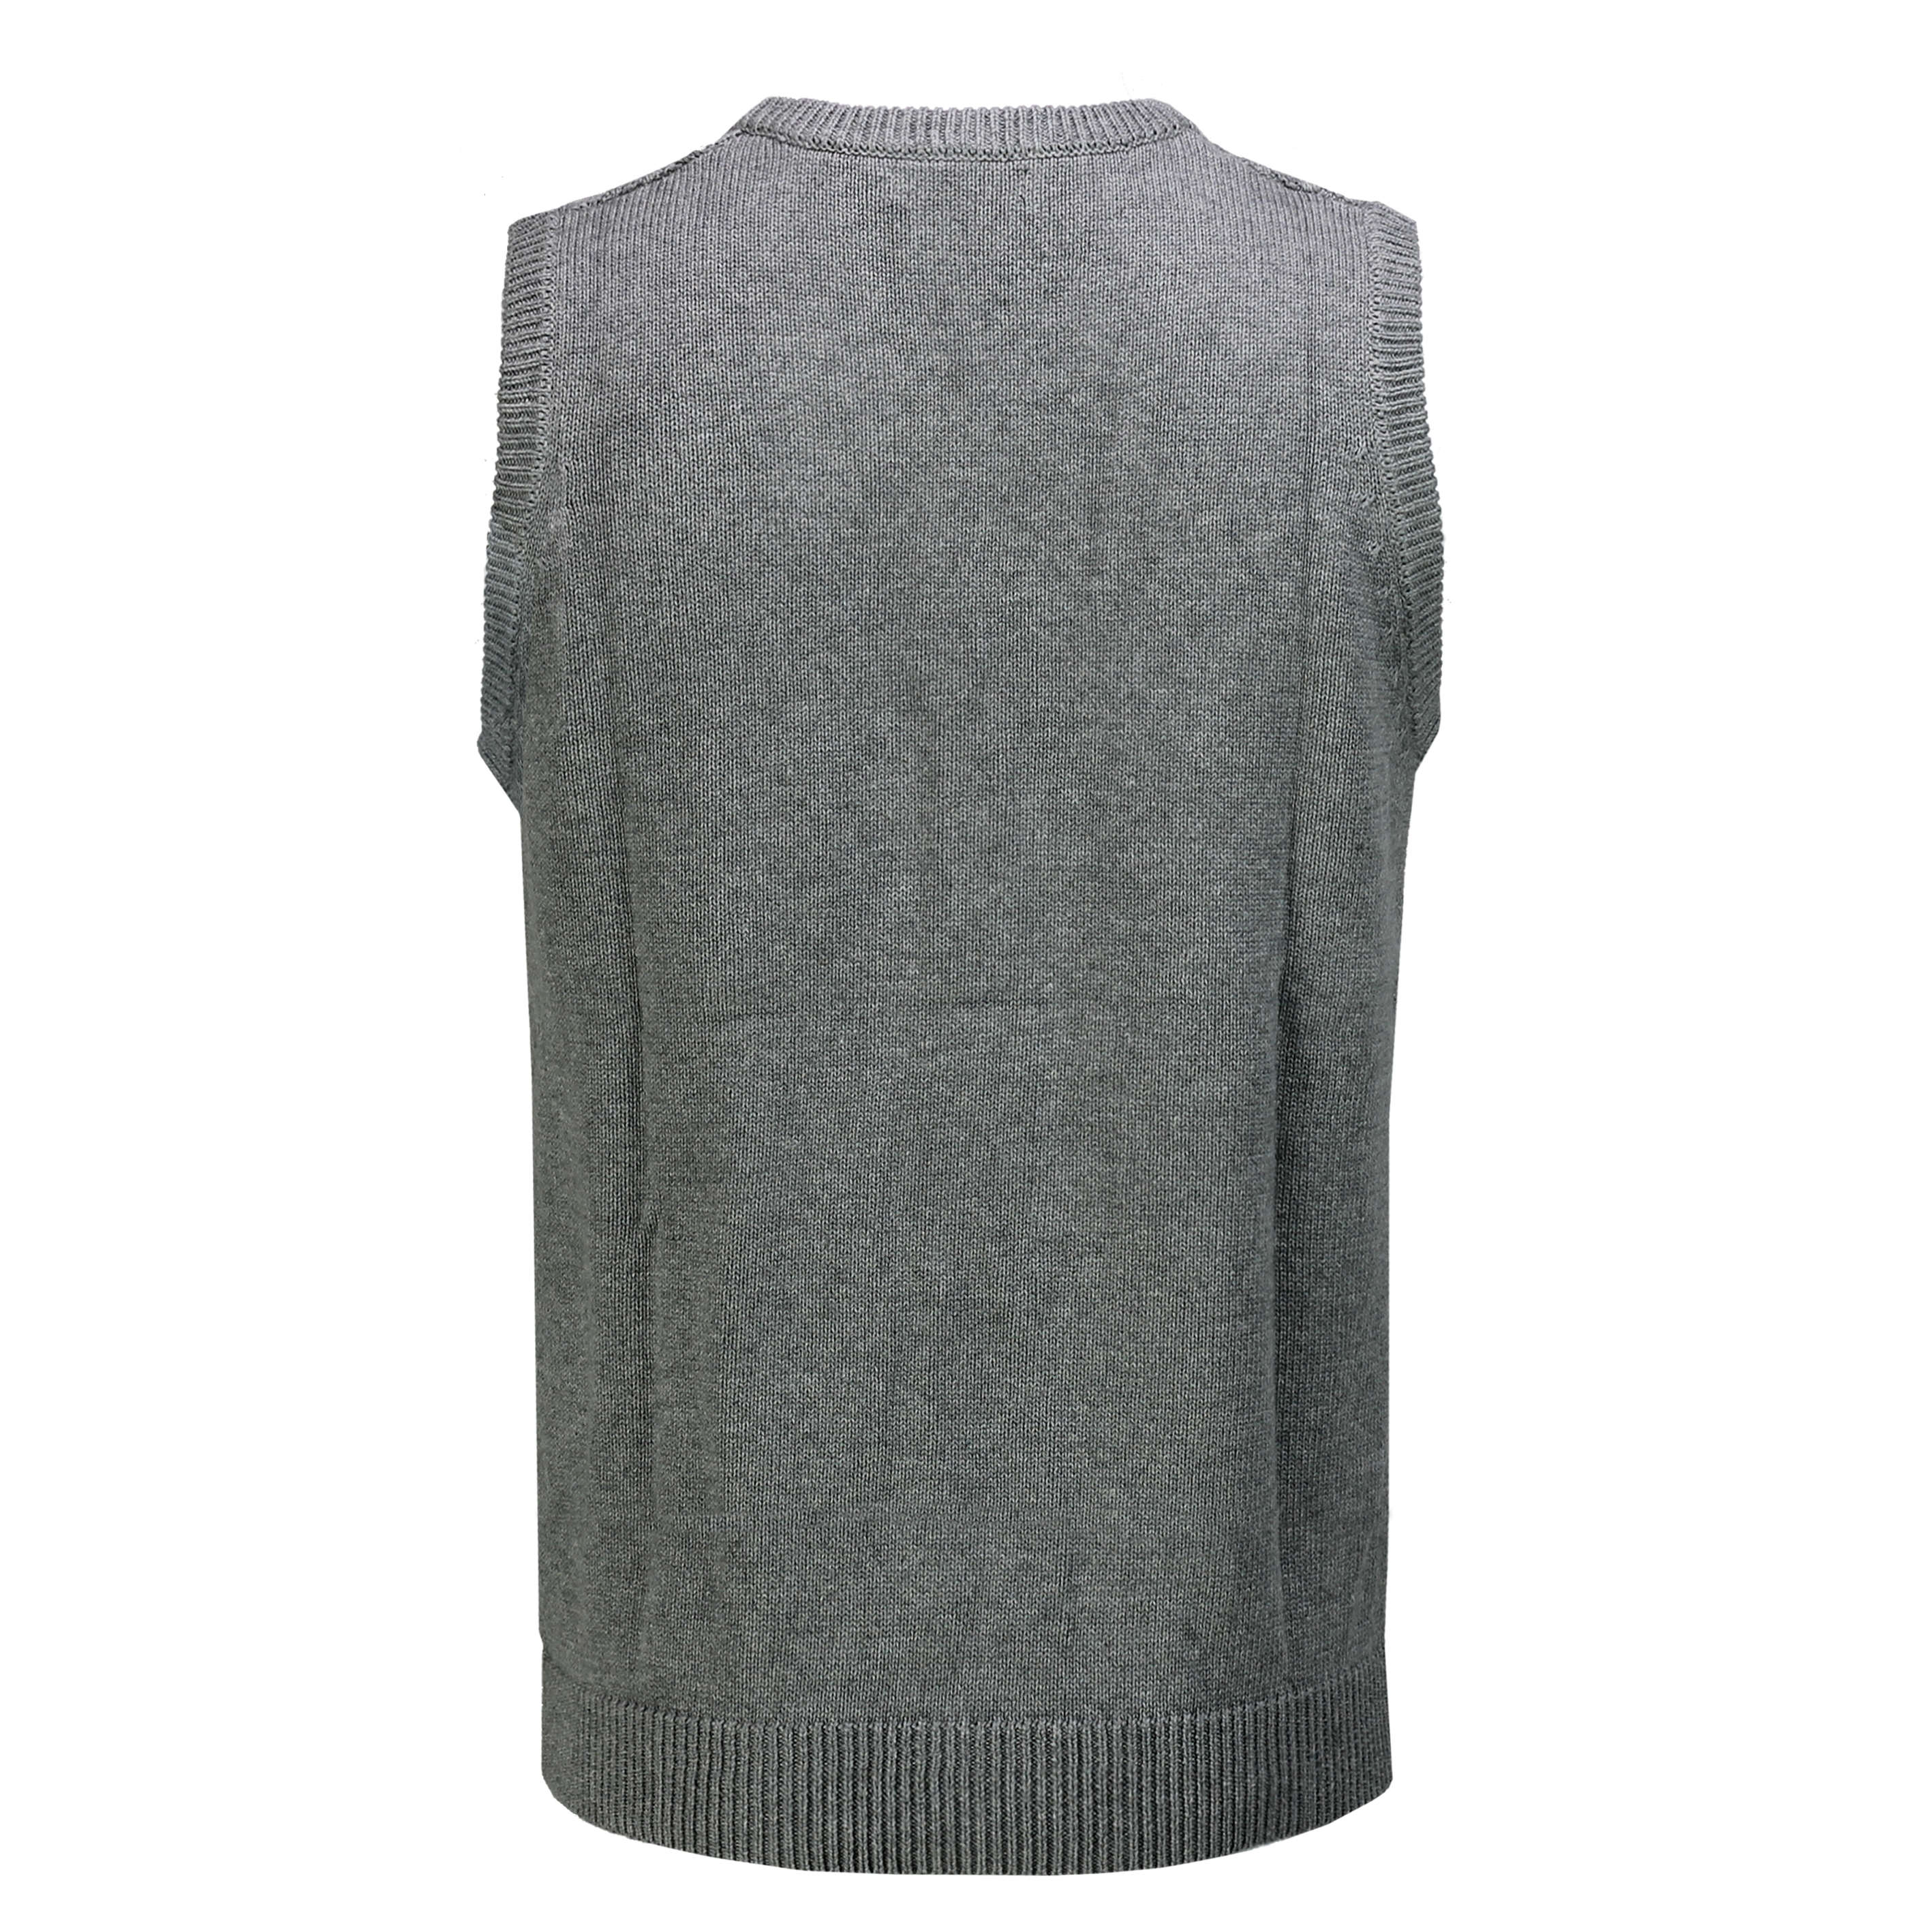 Classic Sleeveless V Neck Grey Jumper Cable Knitted